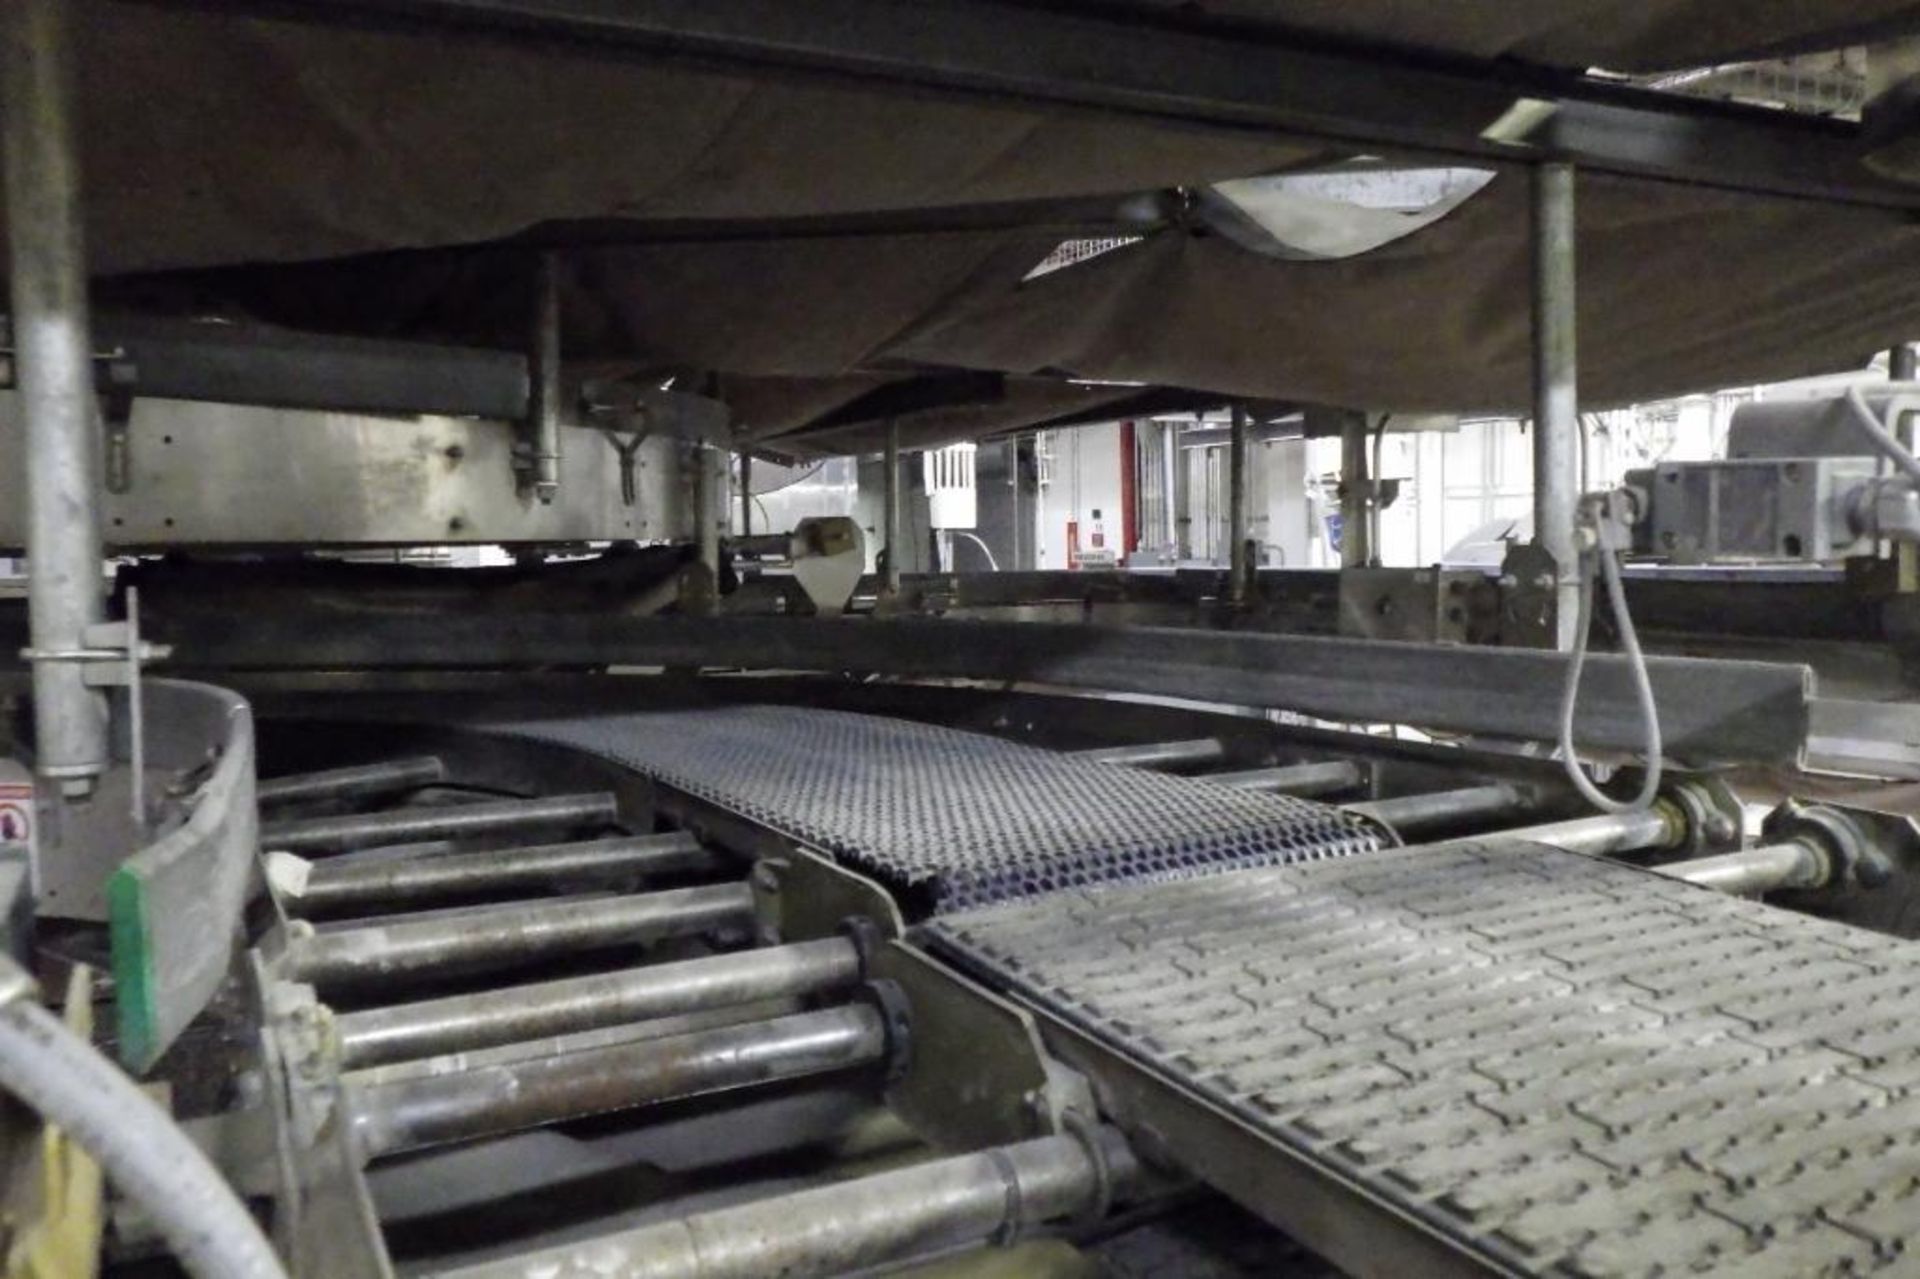 Stewart systems empty pan conveyor - Image 2 of 27